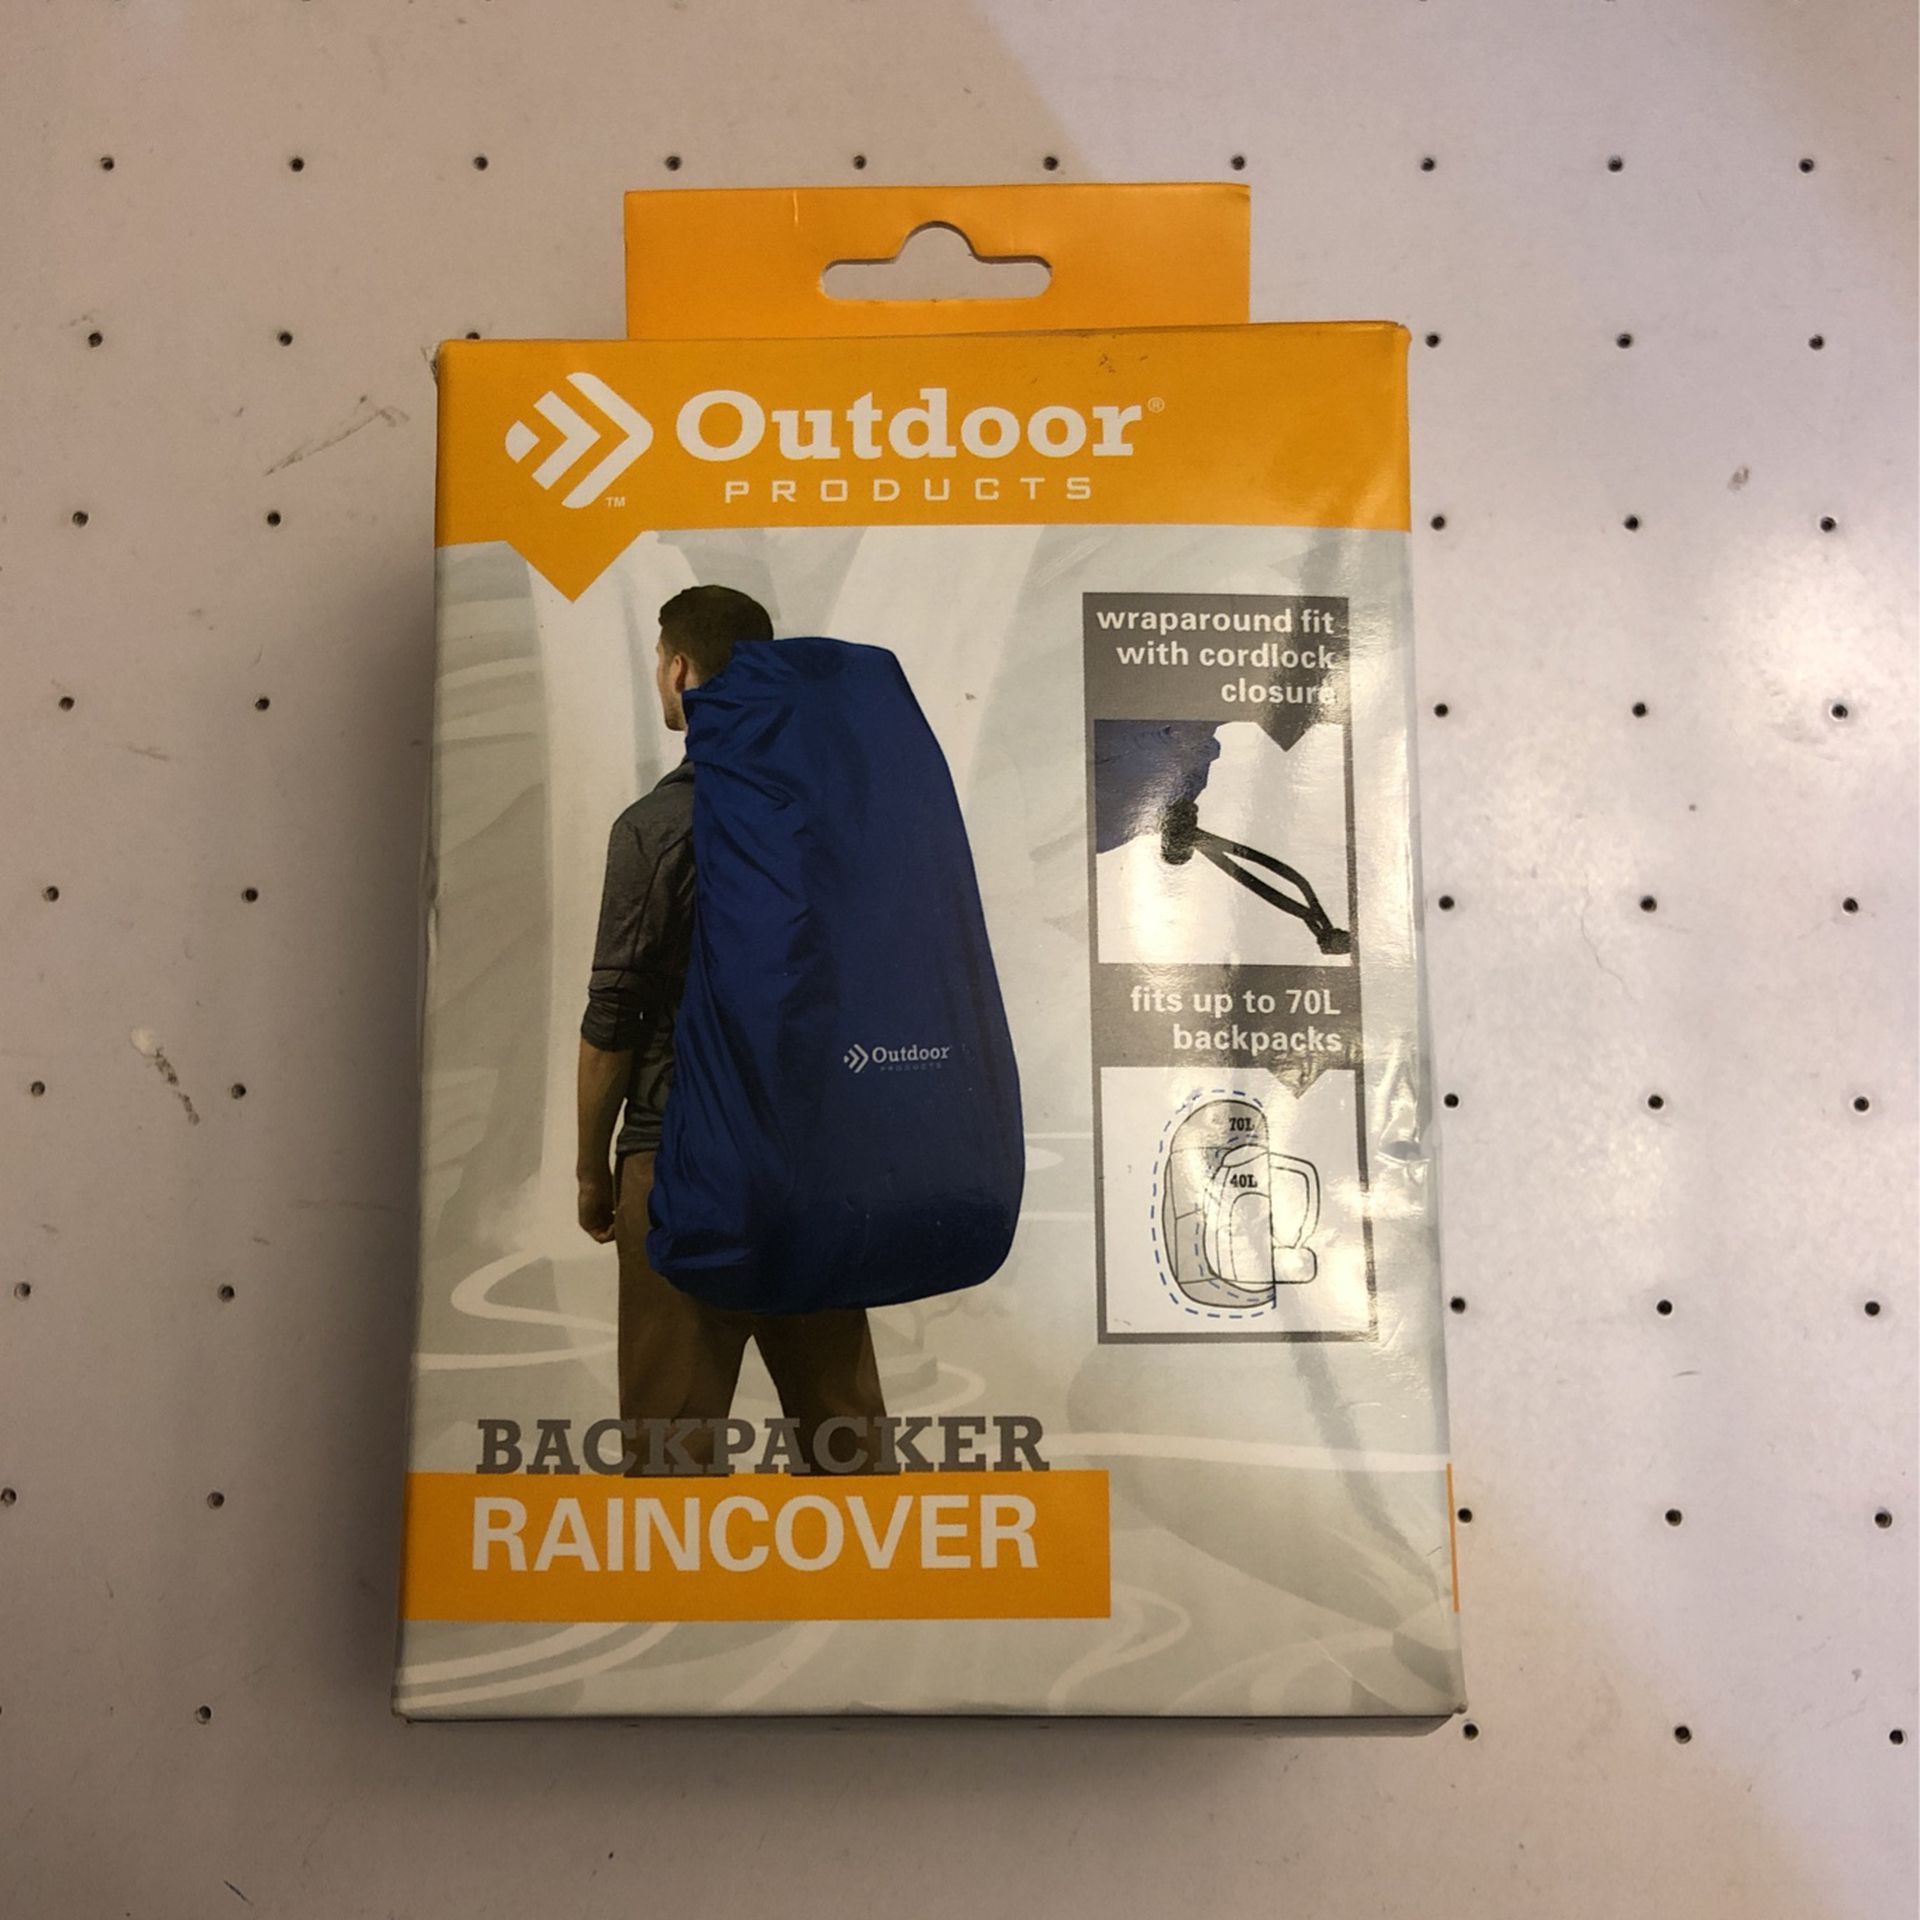 NEW Outdoor Backpack Raincover